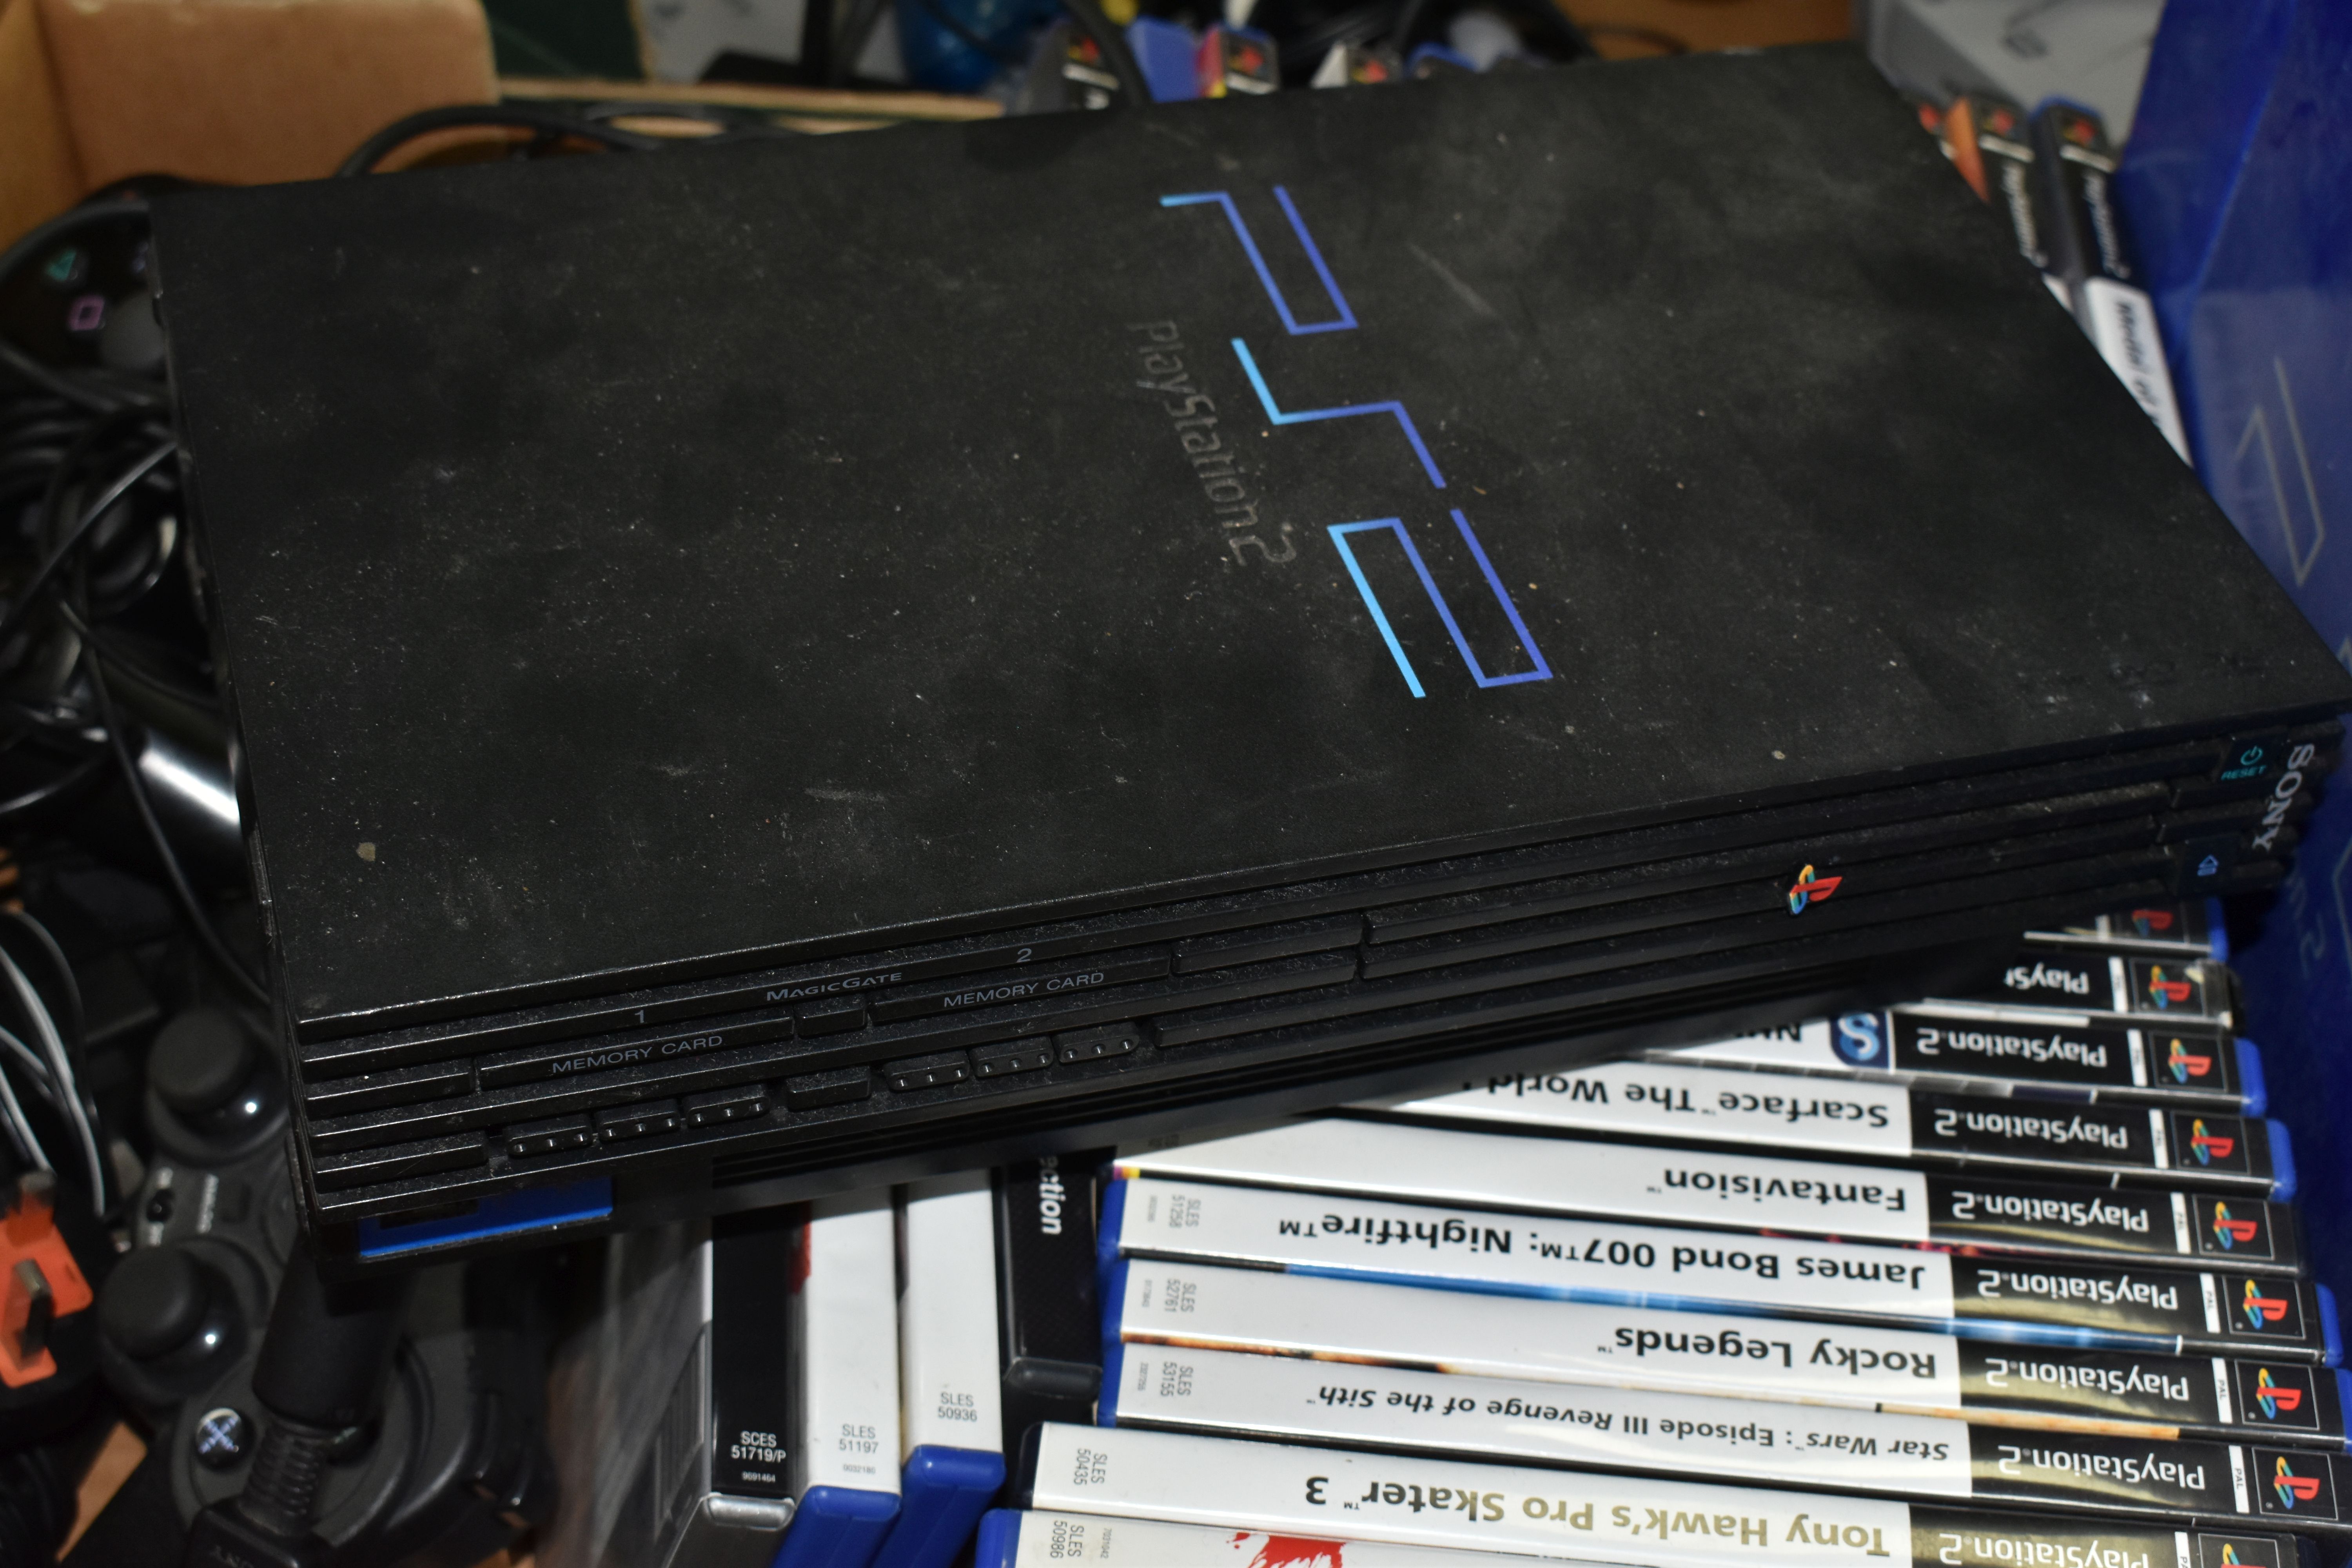 PLAYSTATION 2 CONSOLE BOXED WITH GAMES, forty seven games for PS2 and PS1 including Gran Turismo - Bild 3 aus 3